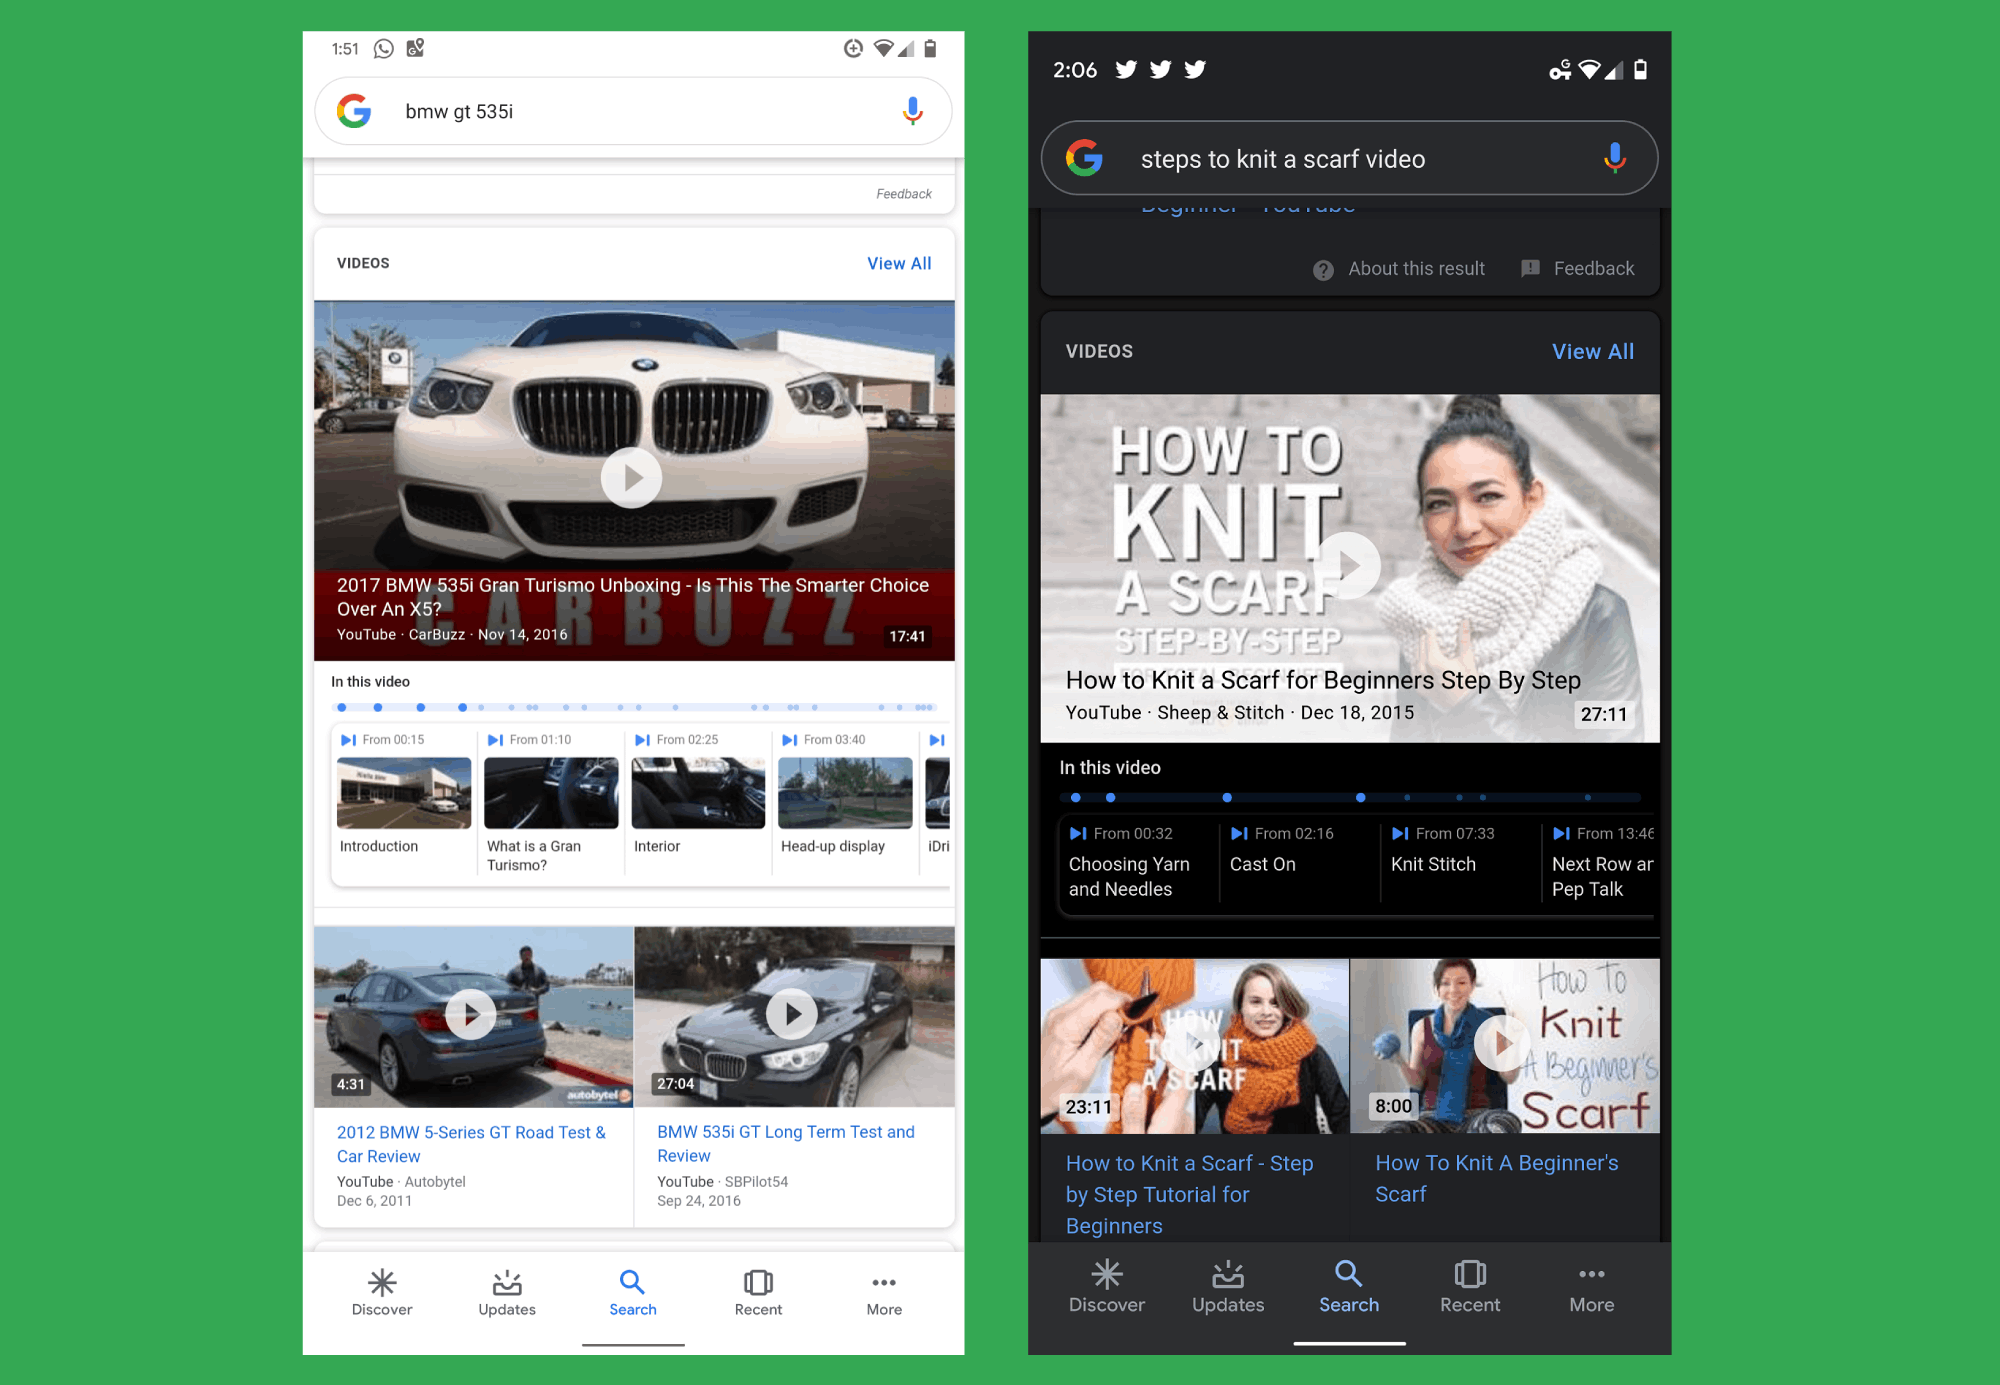 Google mobile app shows 'in this video' bookmarks for YouTube videos search results